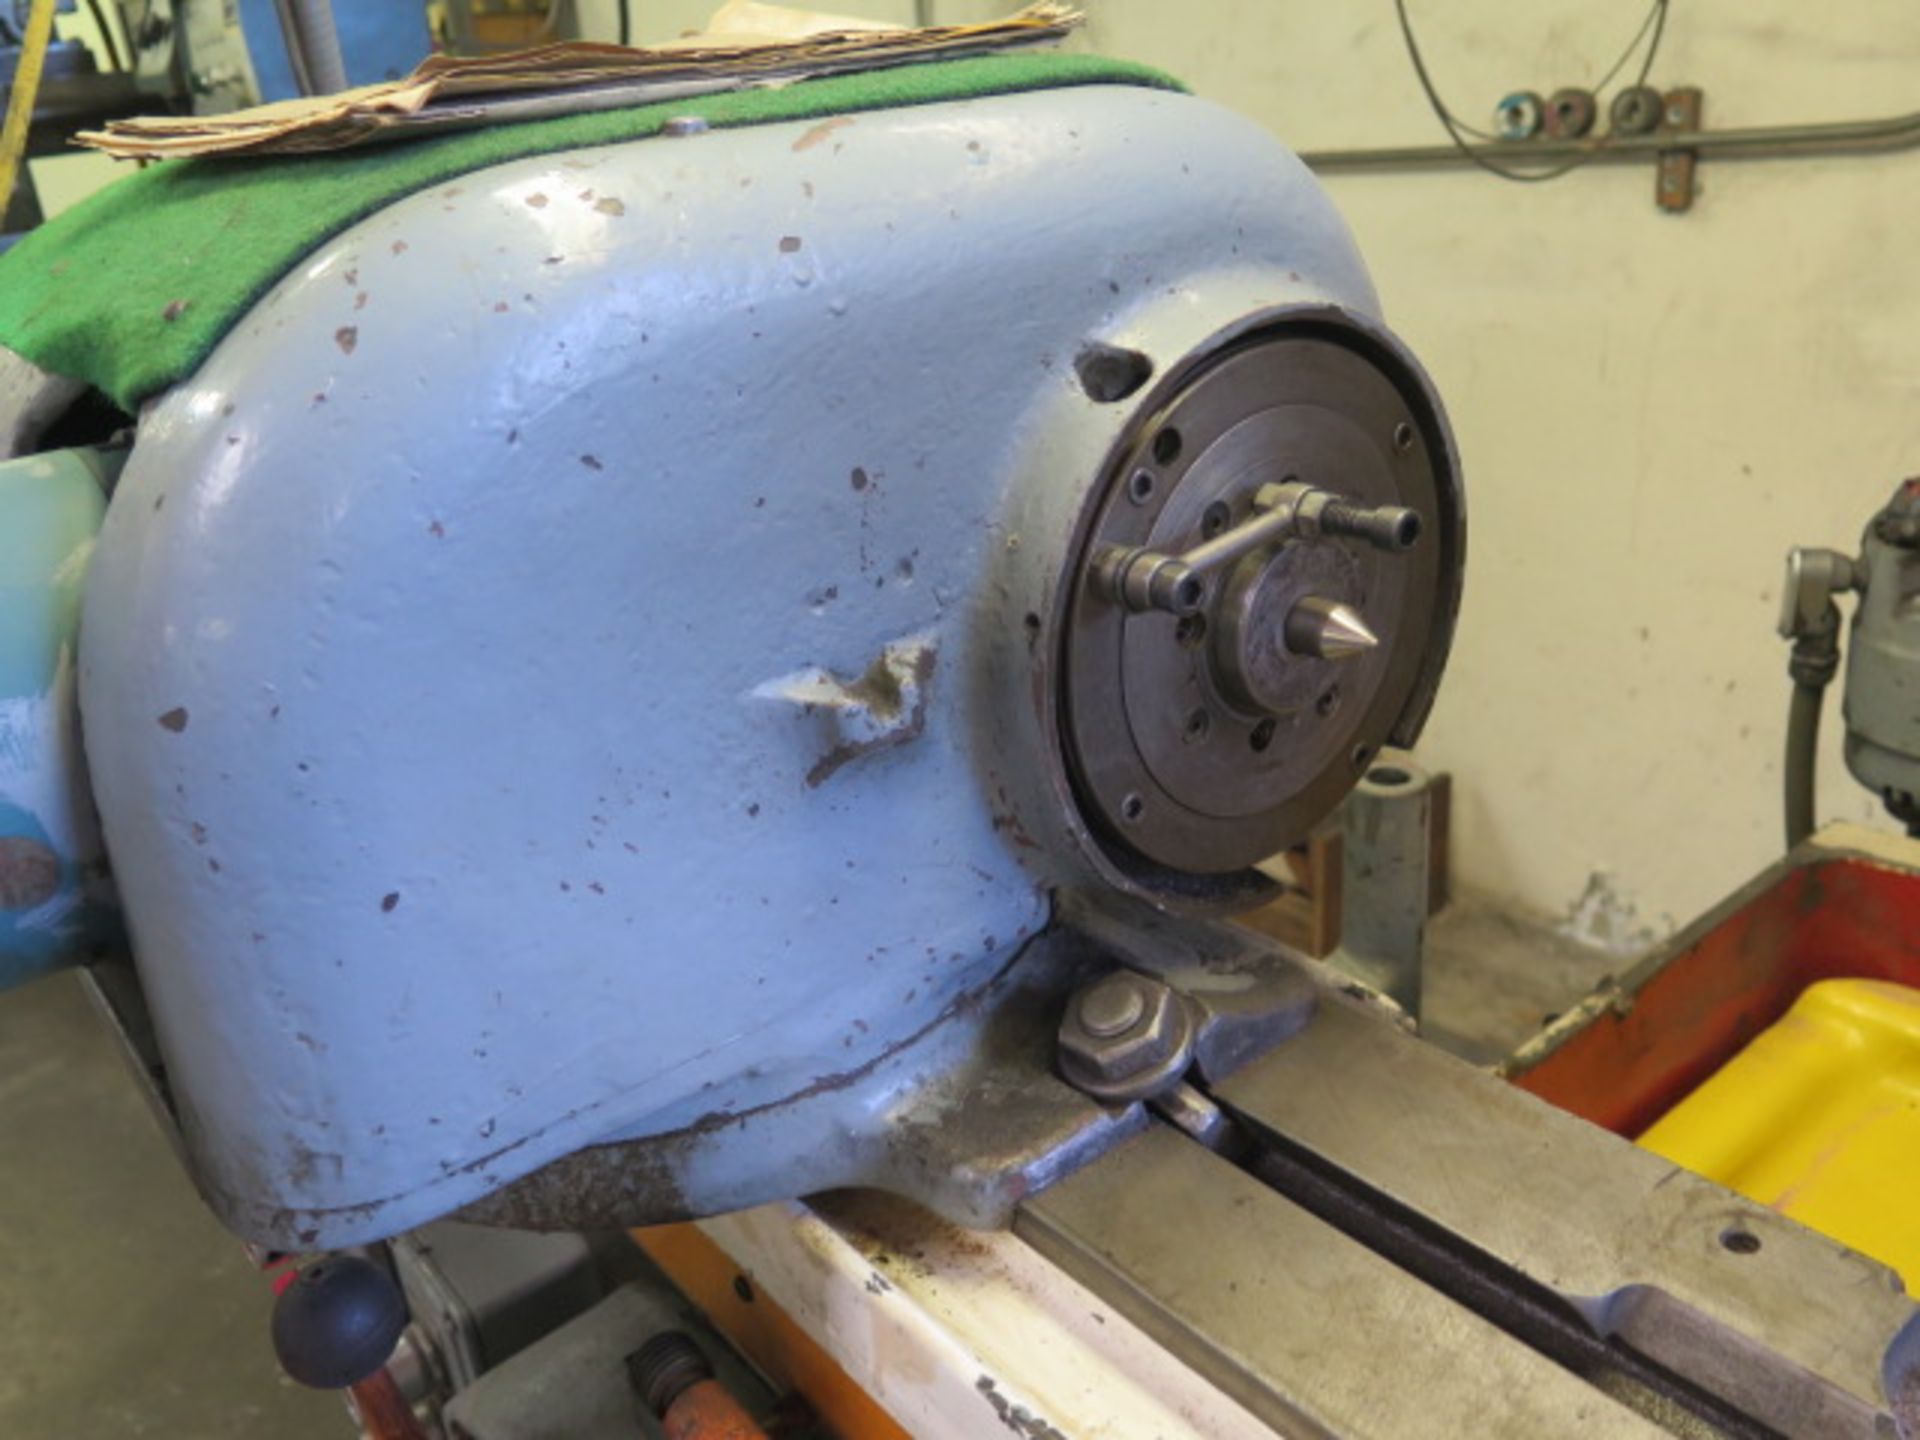 Landis No. 7 Universal OD / ID Grinder s/n 24268 w/ Motorized Work Head, Tailstock, ID Grinding - Image 5 of 14